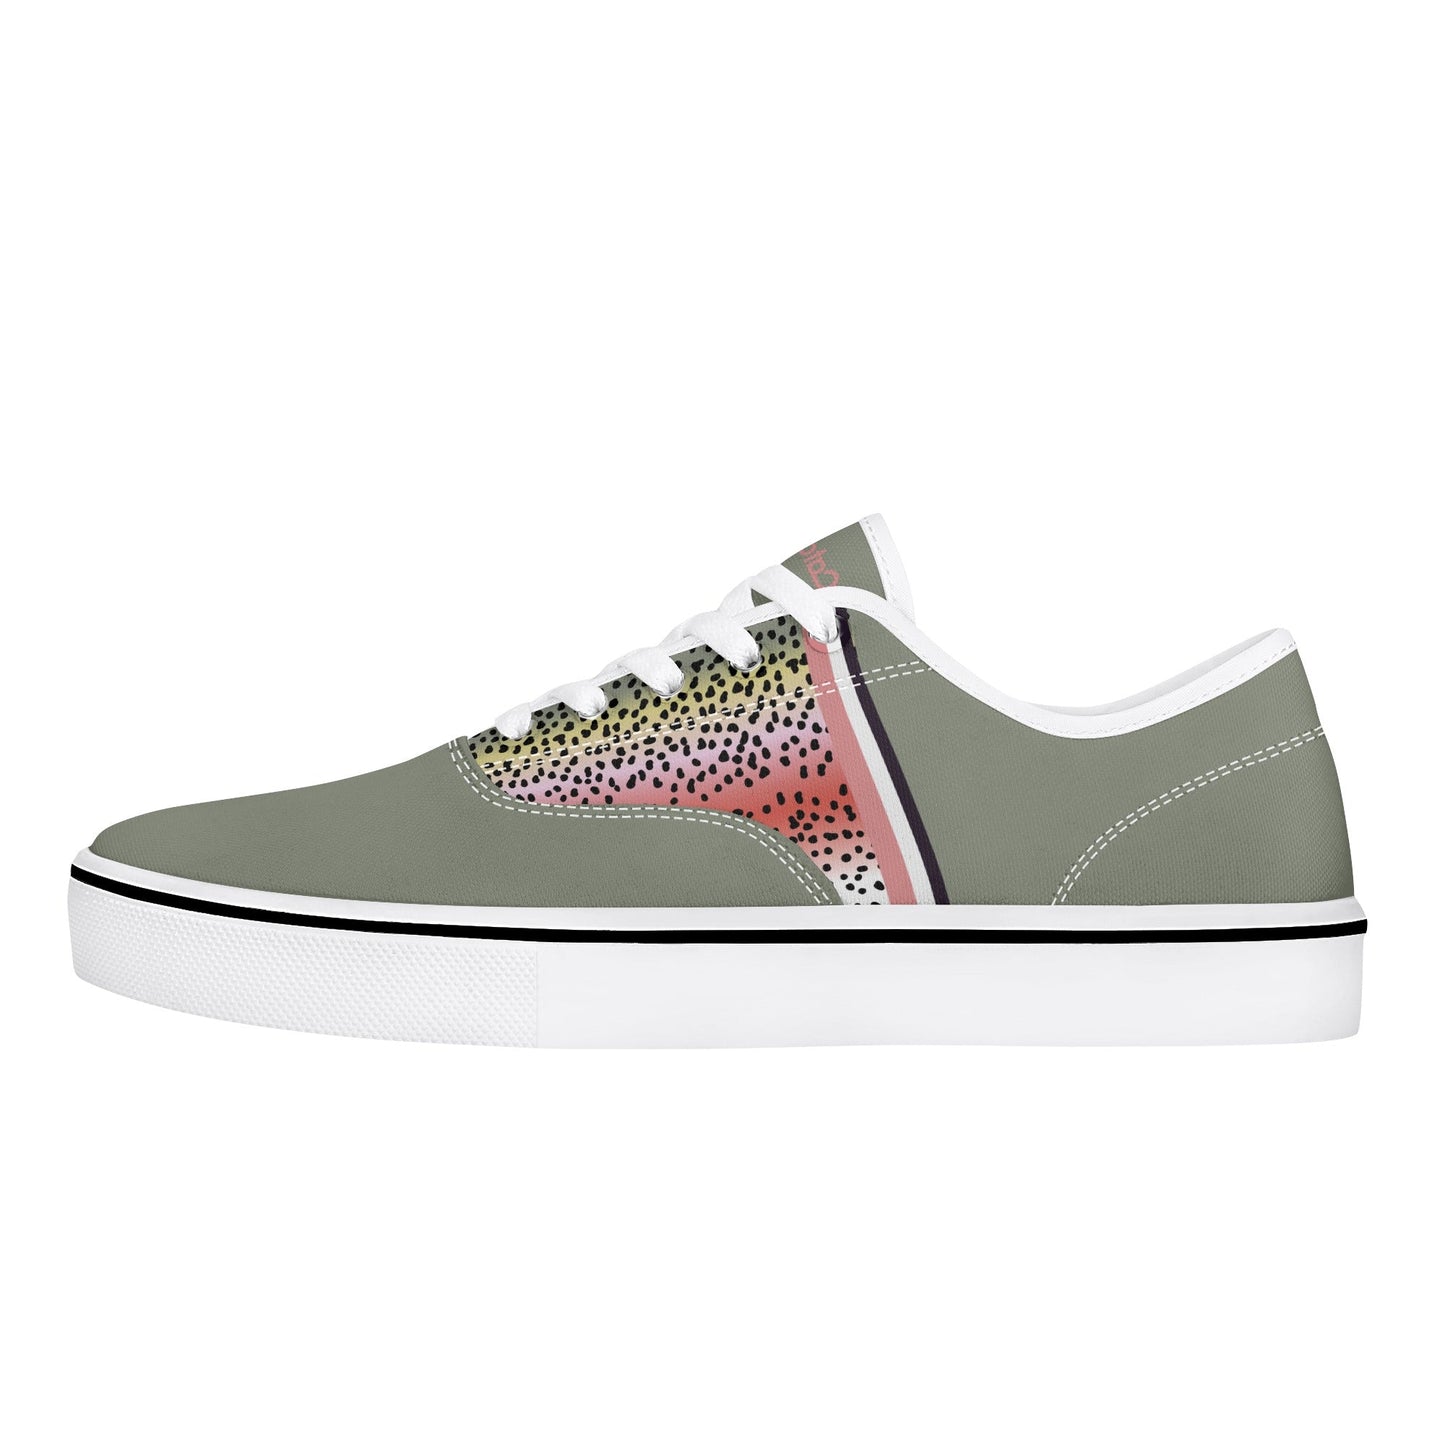 (QUICK SHIP) Womens Bowtown Racer Canvas Boat Shoe